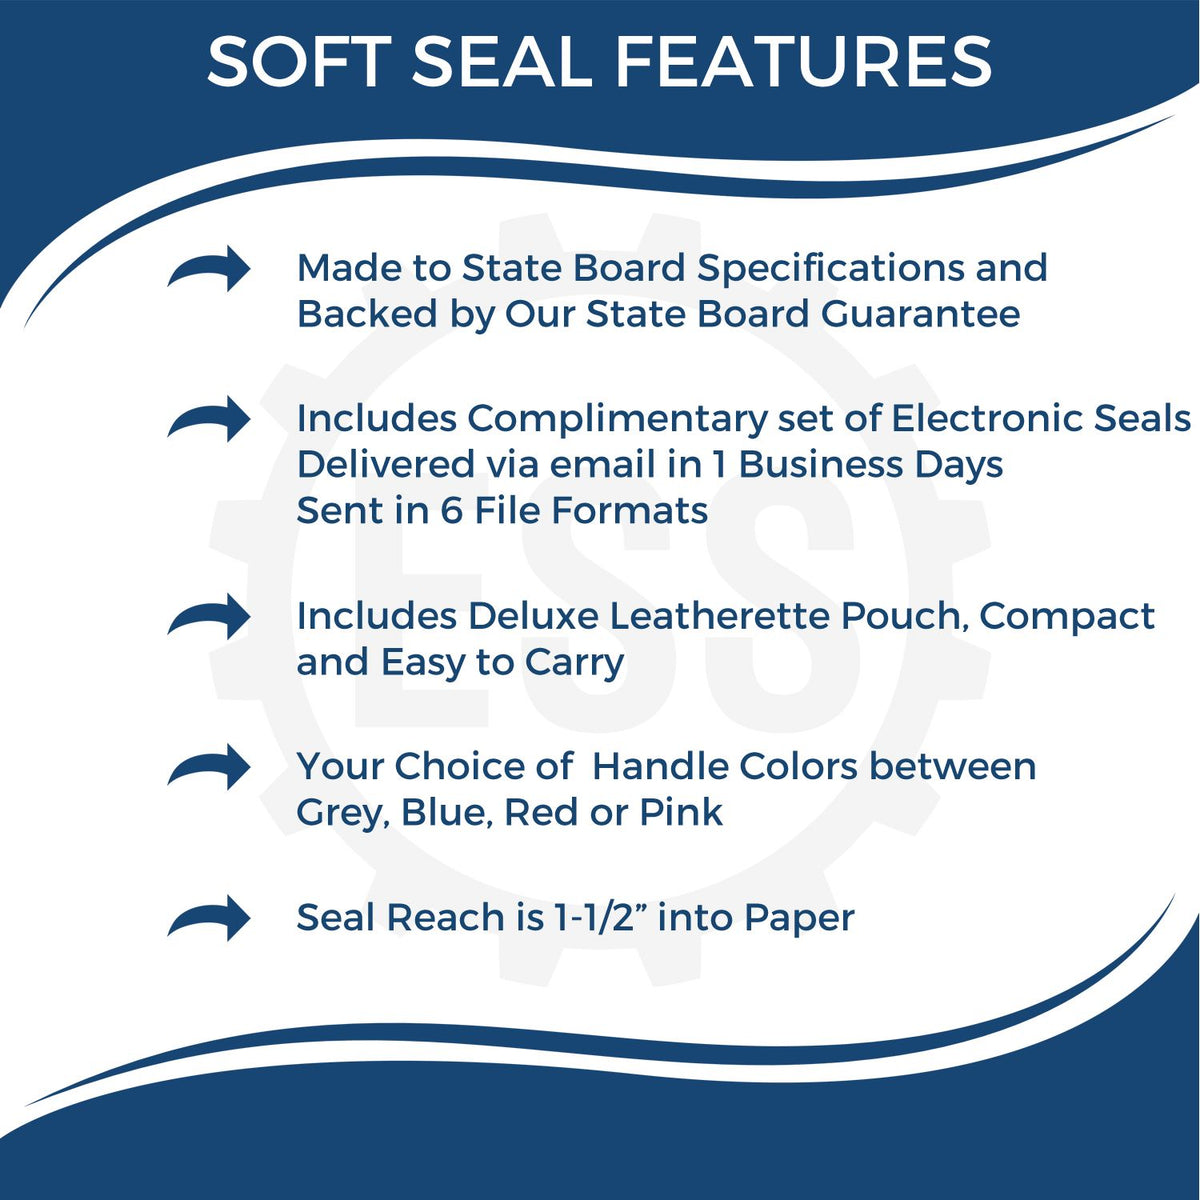 A picture of an infographic highlighting the selling points for the Soft Alaska Professional Engineer Seal